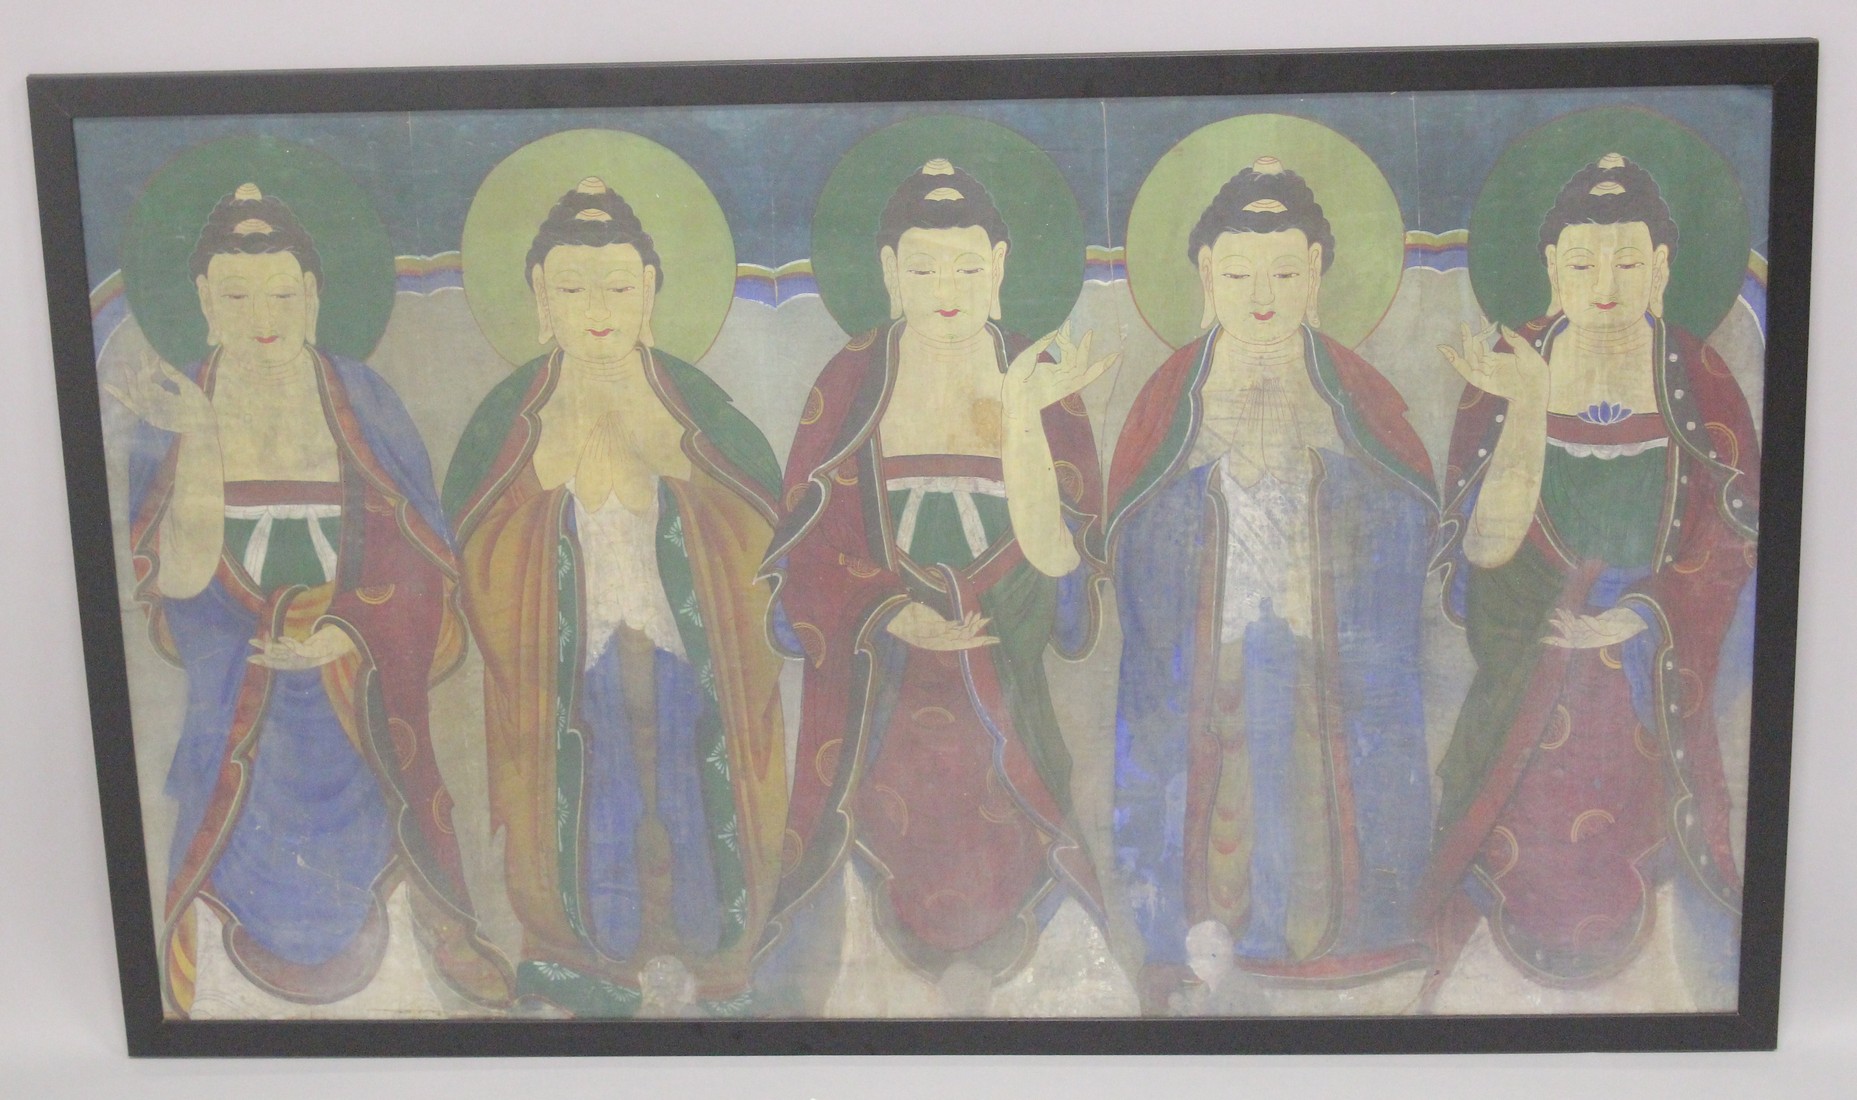 A FINE 19TH CENTURY PAINTING 'FIVE BUDDHAS', framed and glazed, image 71cm x 119.5cm.